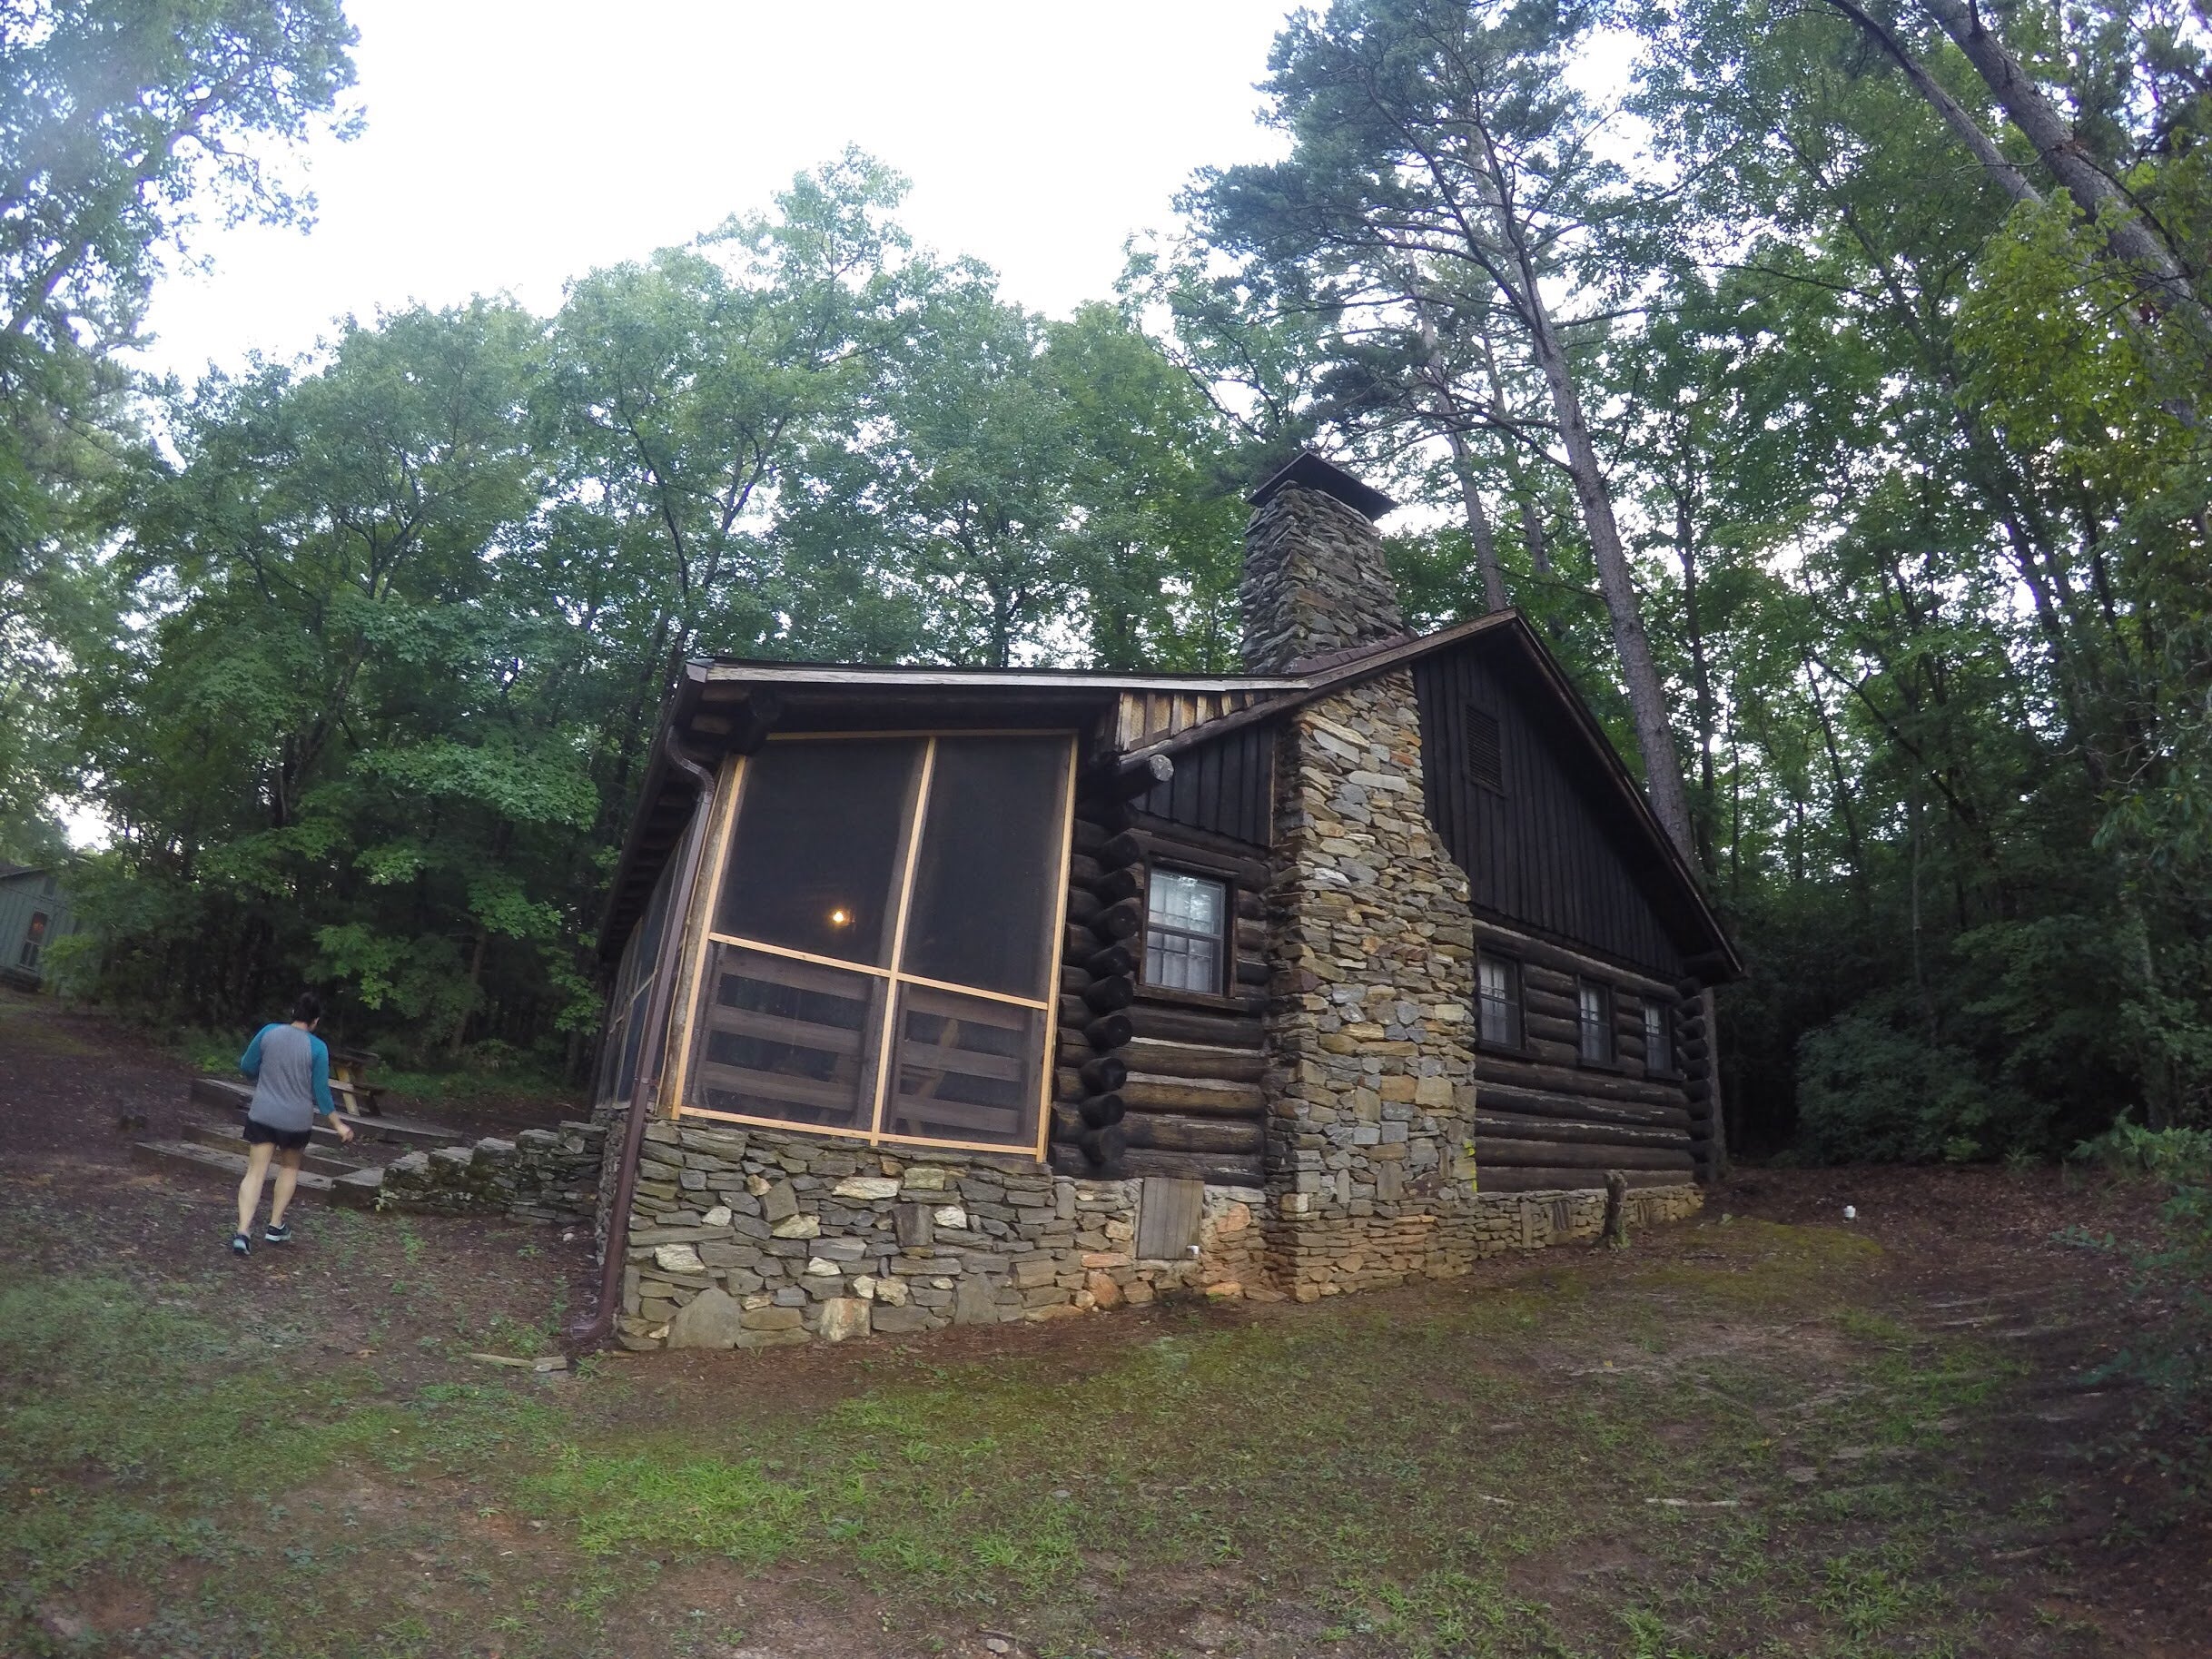 view of cabin from the side